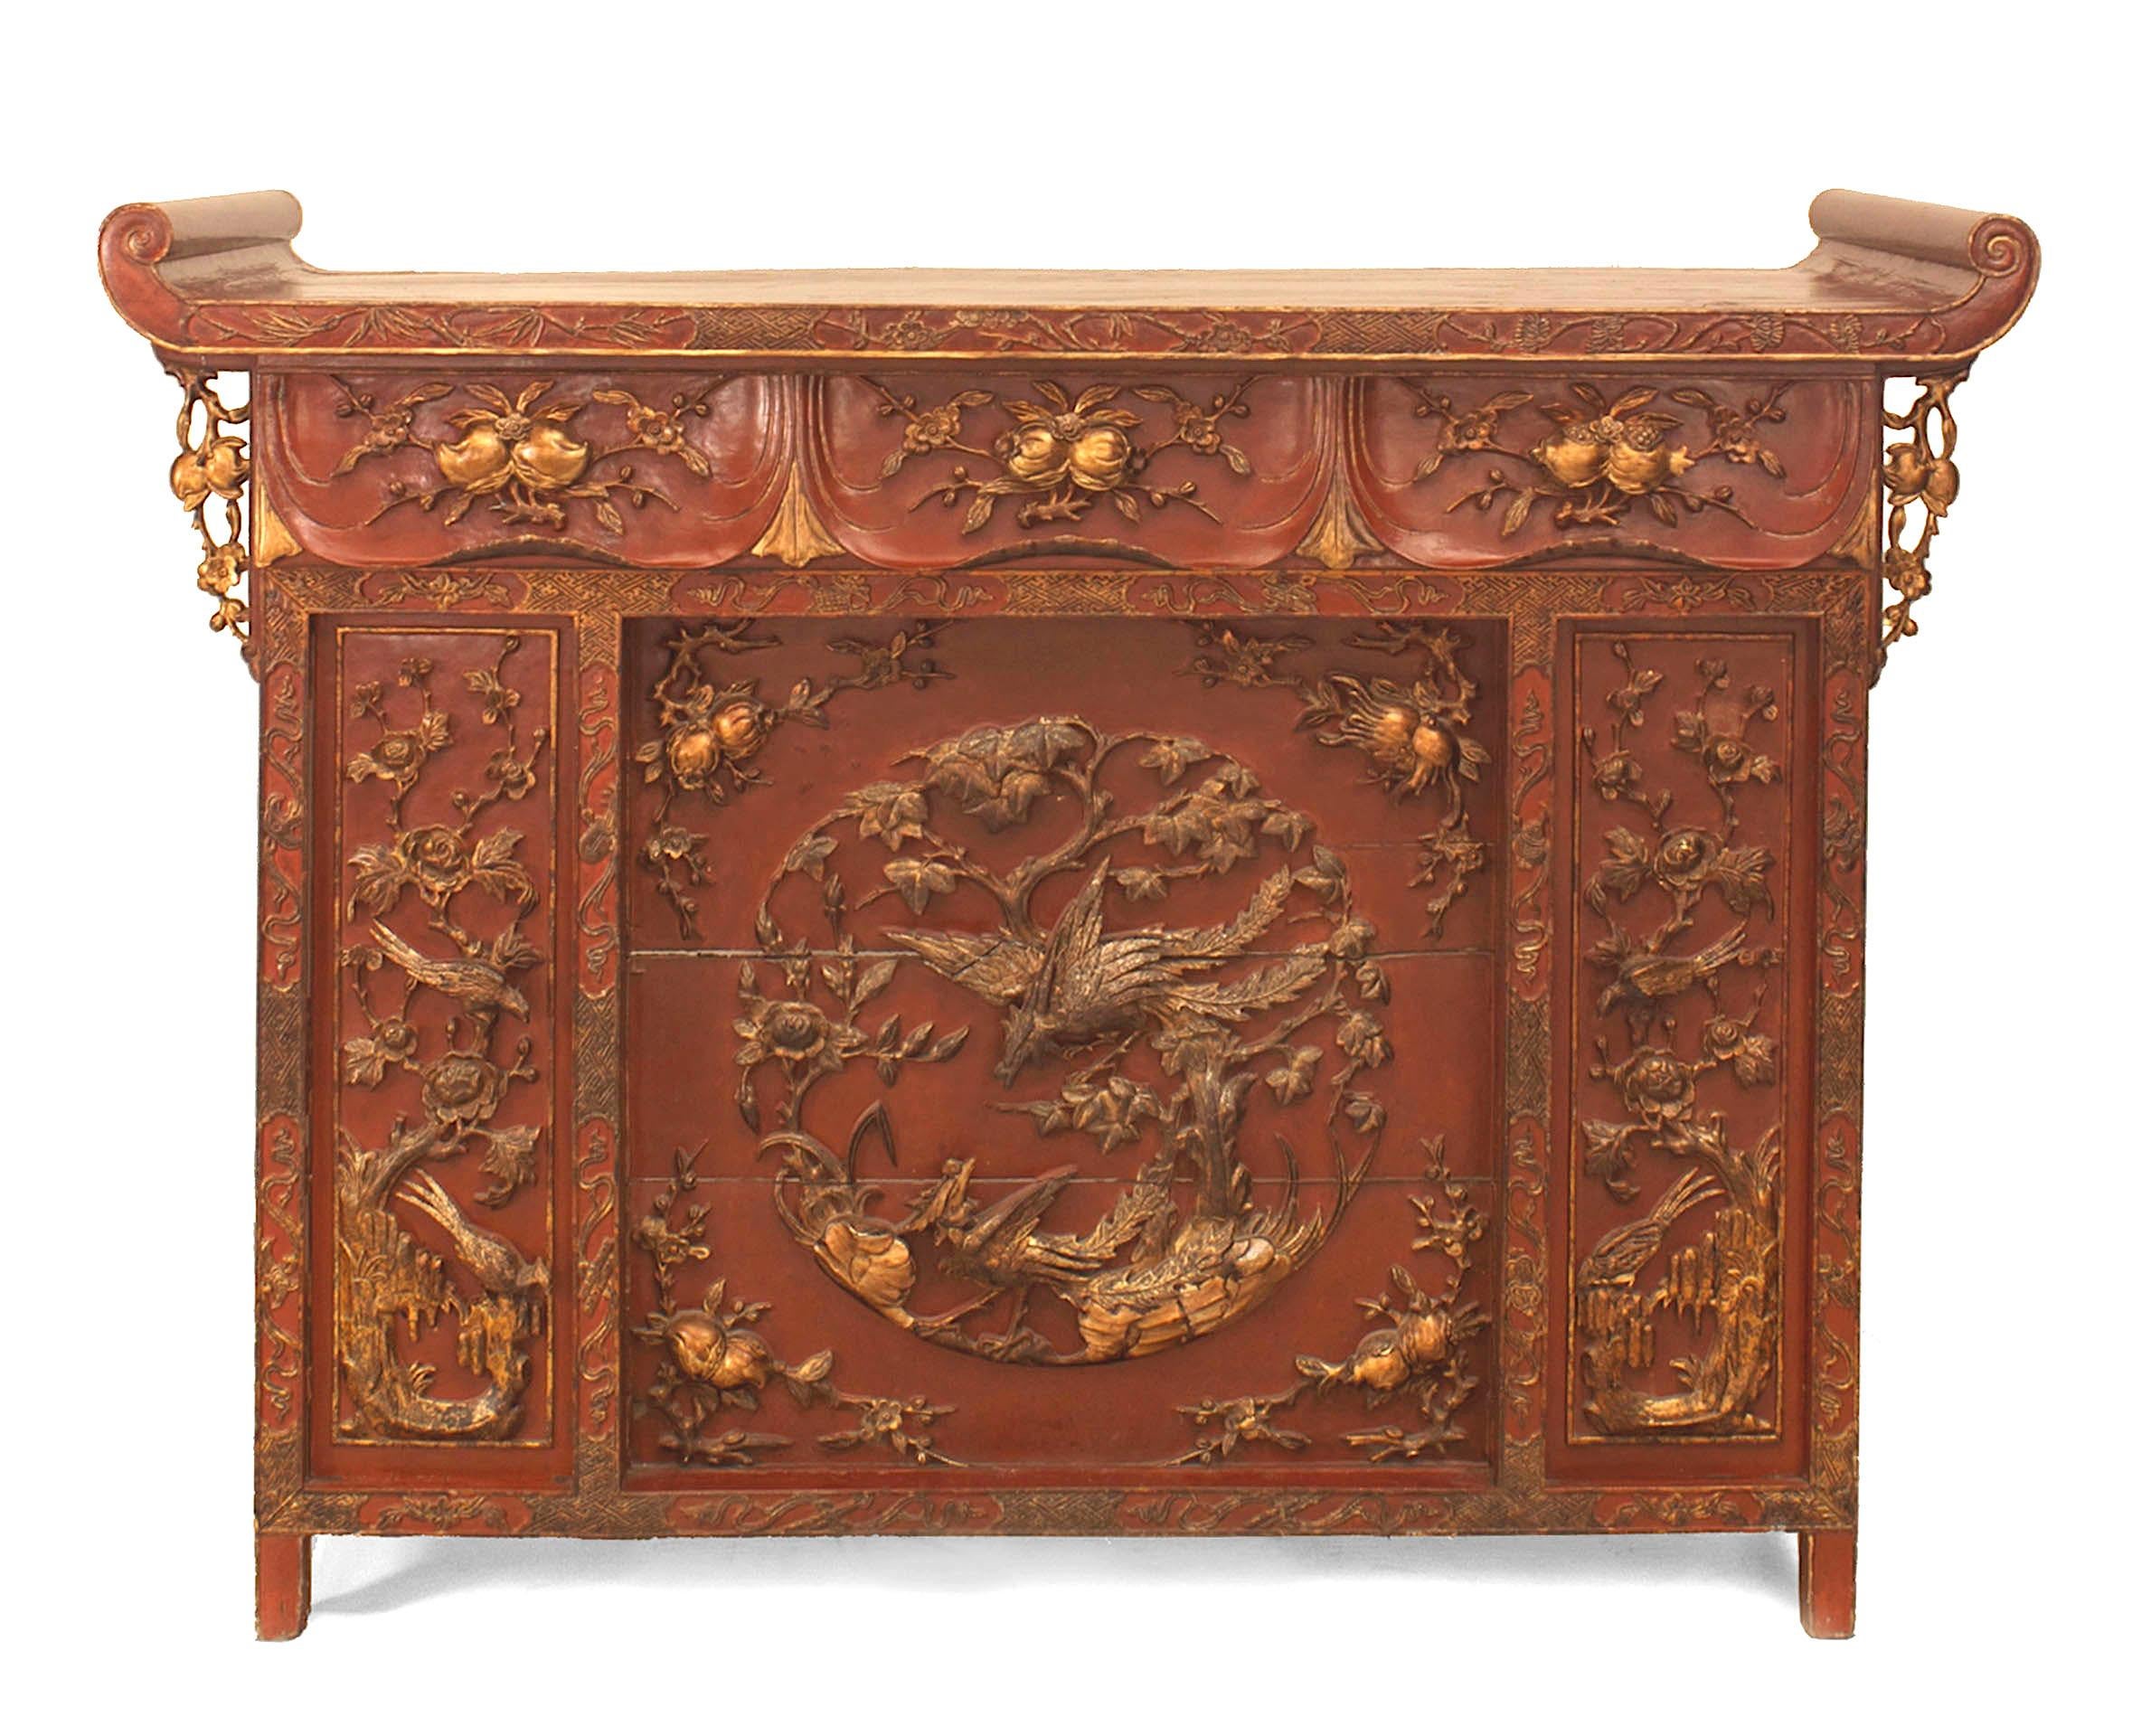 Asian Chinese (Possibly Vietnamese 19th Century) red lacquered and gilt carved console (alter) table with scroll top sides and 3 front panels with carved floral and bird design.
